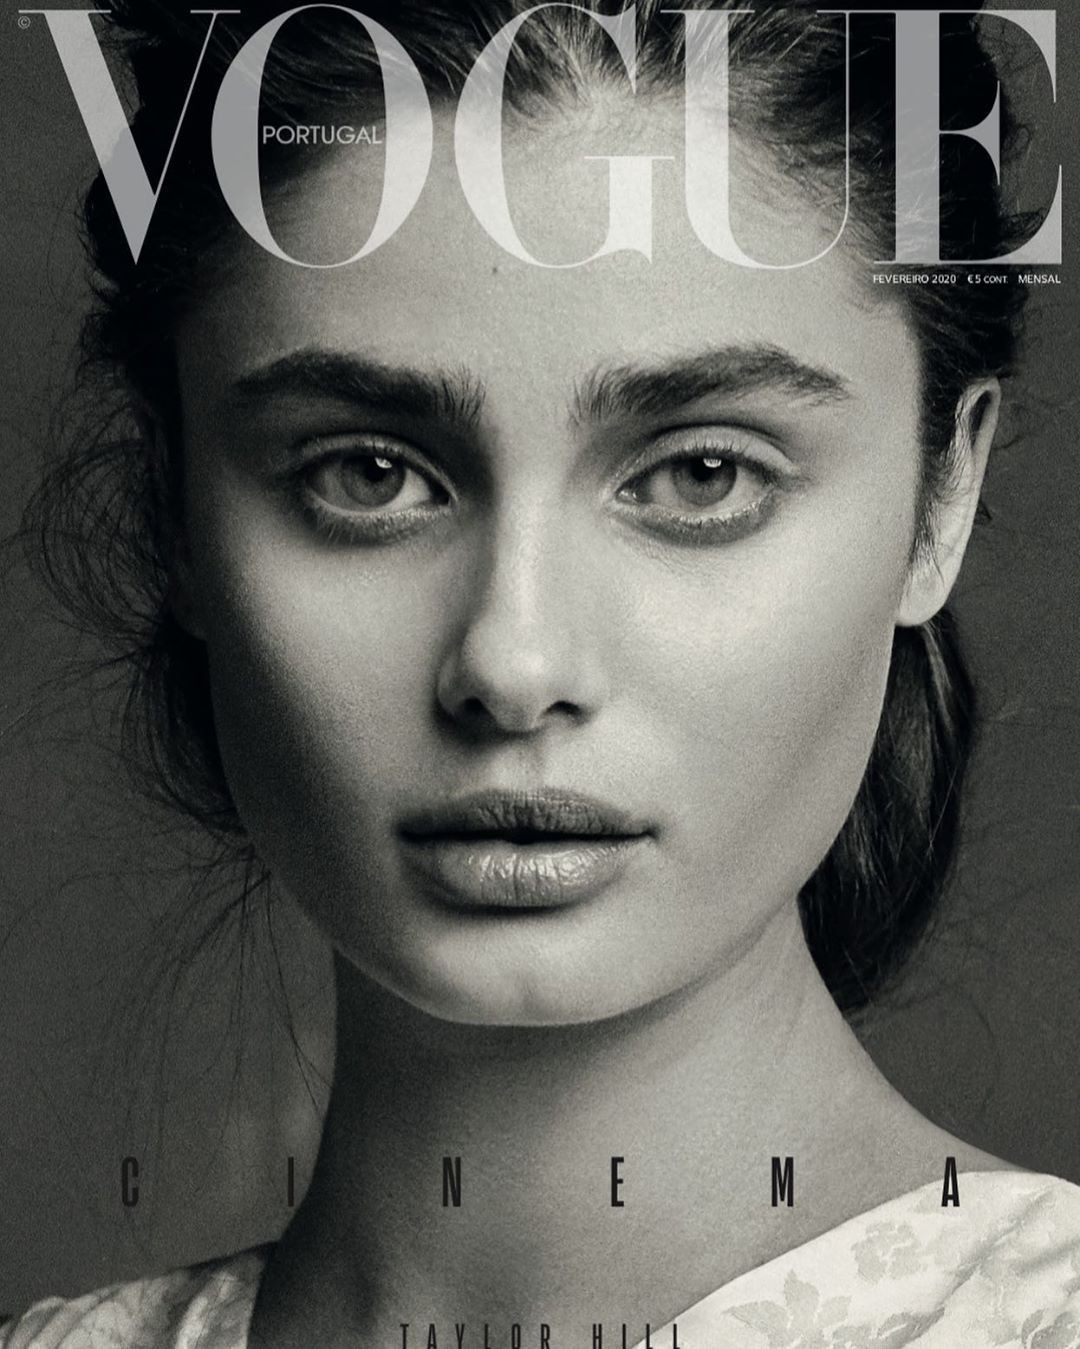 Pretty Recent Taylor Hill Images Insta: Instagram photos,  Hot Instagram Models,  Vogue,  instagram profile picture,  most liked Instagram photo,  top Instagram models,  Super Hot Taylor Hill,  Hot Taylor Hill  